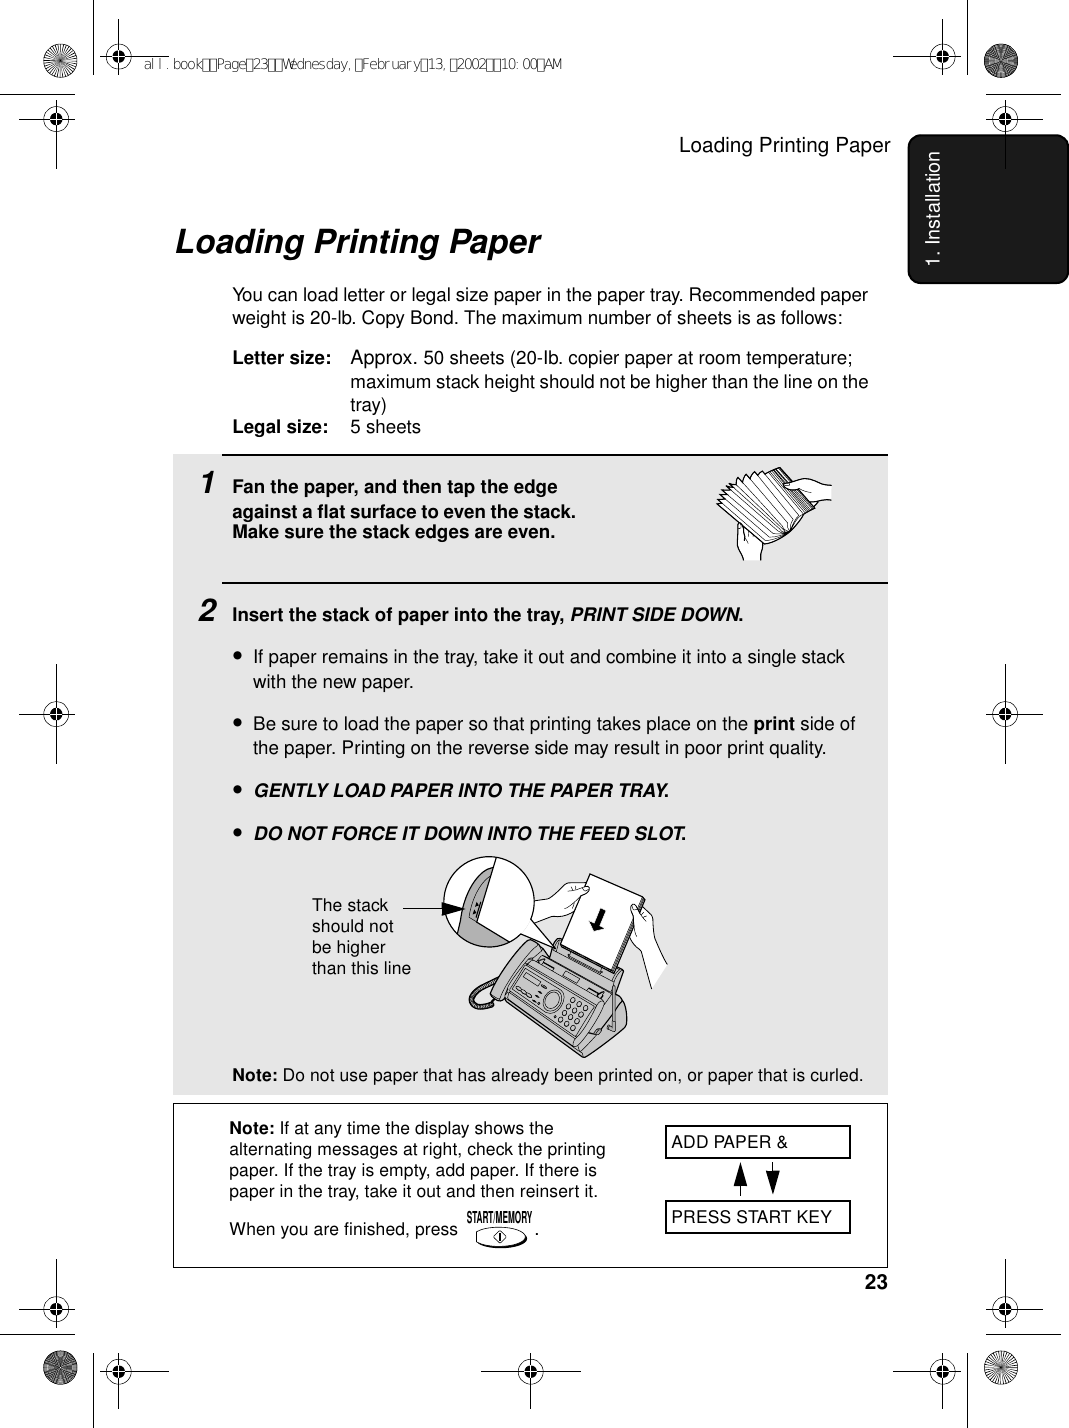 Loading Printing Paper231. Installation1Fan the paper, and then tap the edge against a flat surface to even the stack. Make sure the stack edges are even.2Insert the stack of paper into the tray, PRINT SIDE DOWN.•If paper remains in the tray, take it out and combine it into a single stack with the new paper.•Be sure to load the paper so that printing takes place on the print side of the paper. Printing on the reverse side may result in poor print quality.•GENTLY LOAD PAPER INTO THE PAPER TRAY.•DO NOT FORCE IT DOWN INTO THE FEED SLOT.Note: Do not use paper that has already been printed on, or paper that is curled. Loading Printing PaperYou can load letter or legal size paper in the paper tray. Recommended paper weight is 20-lb. Copy Bond. The maximum number of sheets is as follows:Letter size: Approx. 50 sheets (20-Ib. copier paper at room temperature; maximum stack height should not be higher than the line on the tray)Legal size: 5 sheetsNote: If at any time the display shows the alternating messages at right, check the printing paper. If the tray is empty, add paper. If there is paper in the tray, take it out and then reinsert it. When you are finished, press .START/MEMORYADD PAPER &amp;PRESS START KEYThe stack should not be higher than this lineall.bookPage23Wednesday,February13,200210:00AM